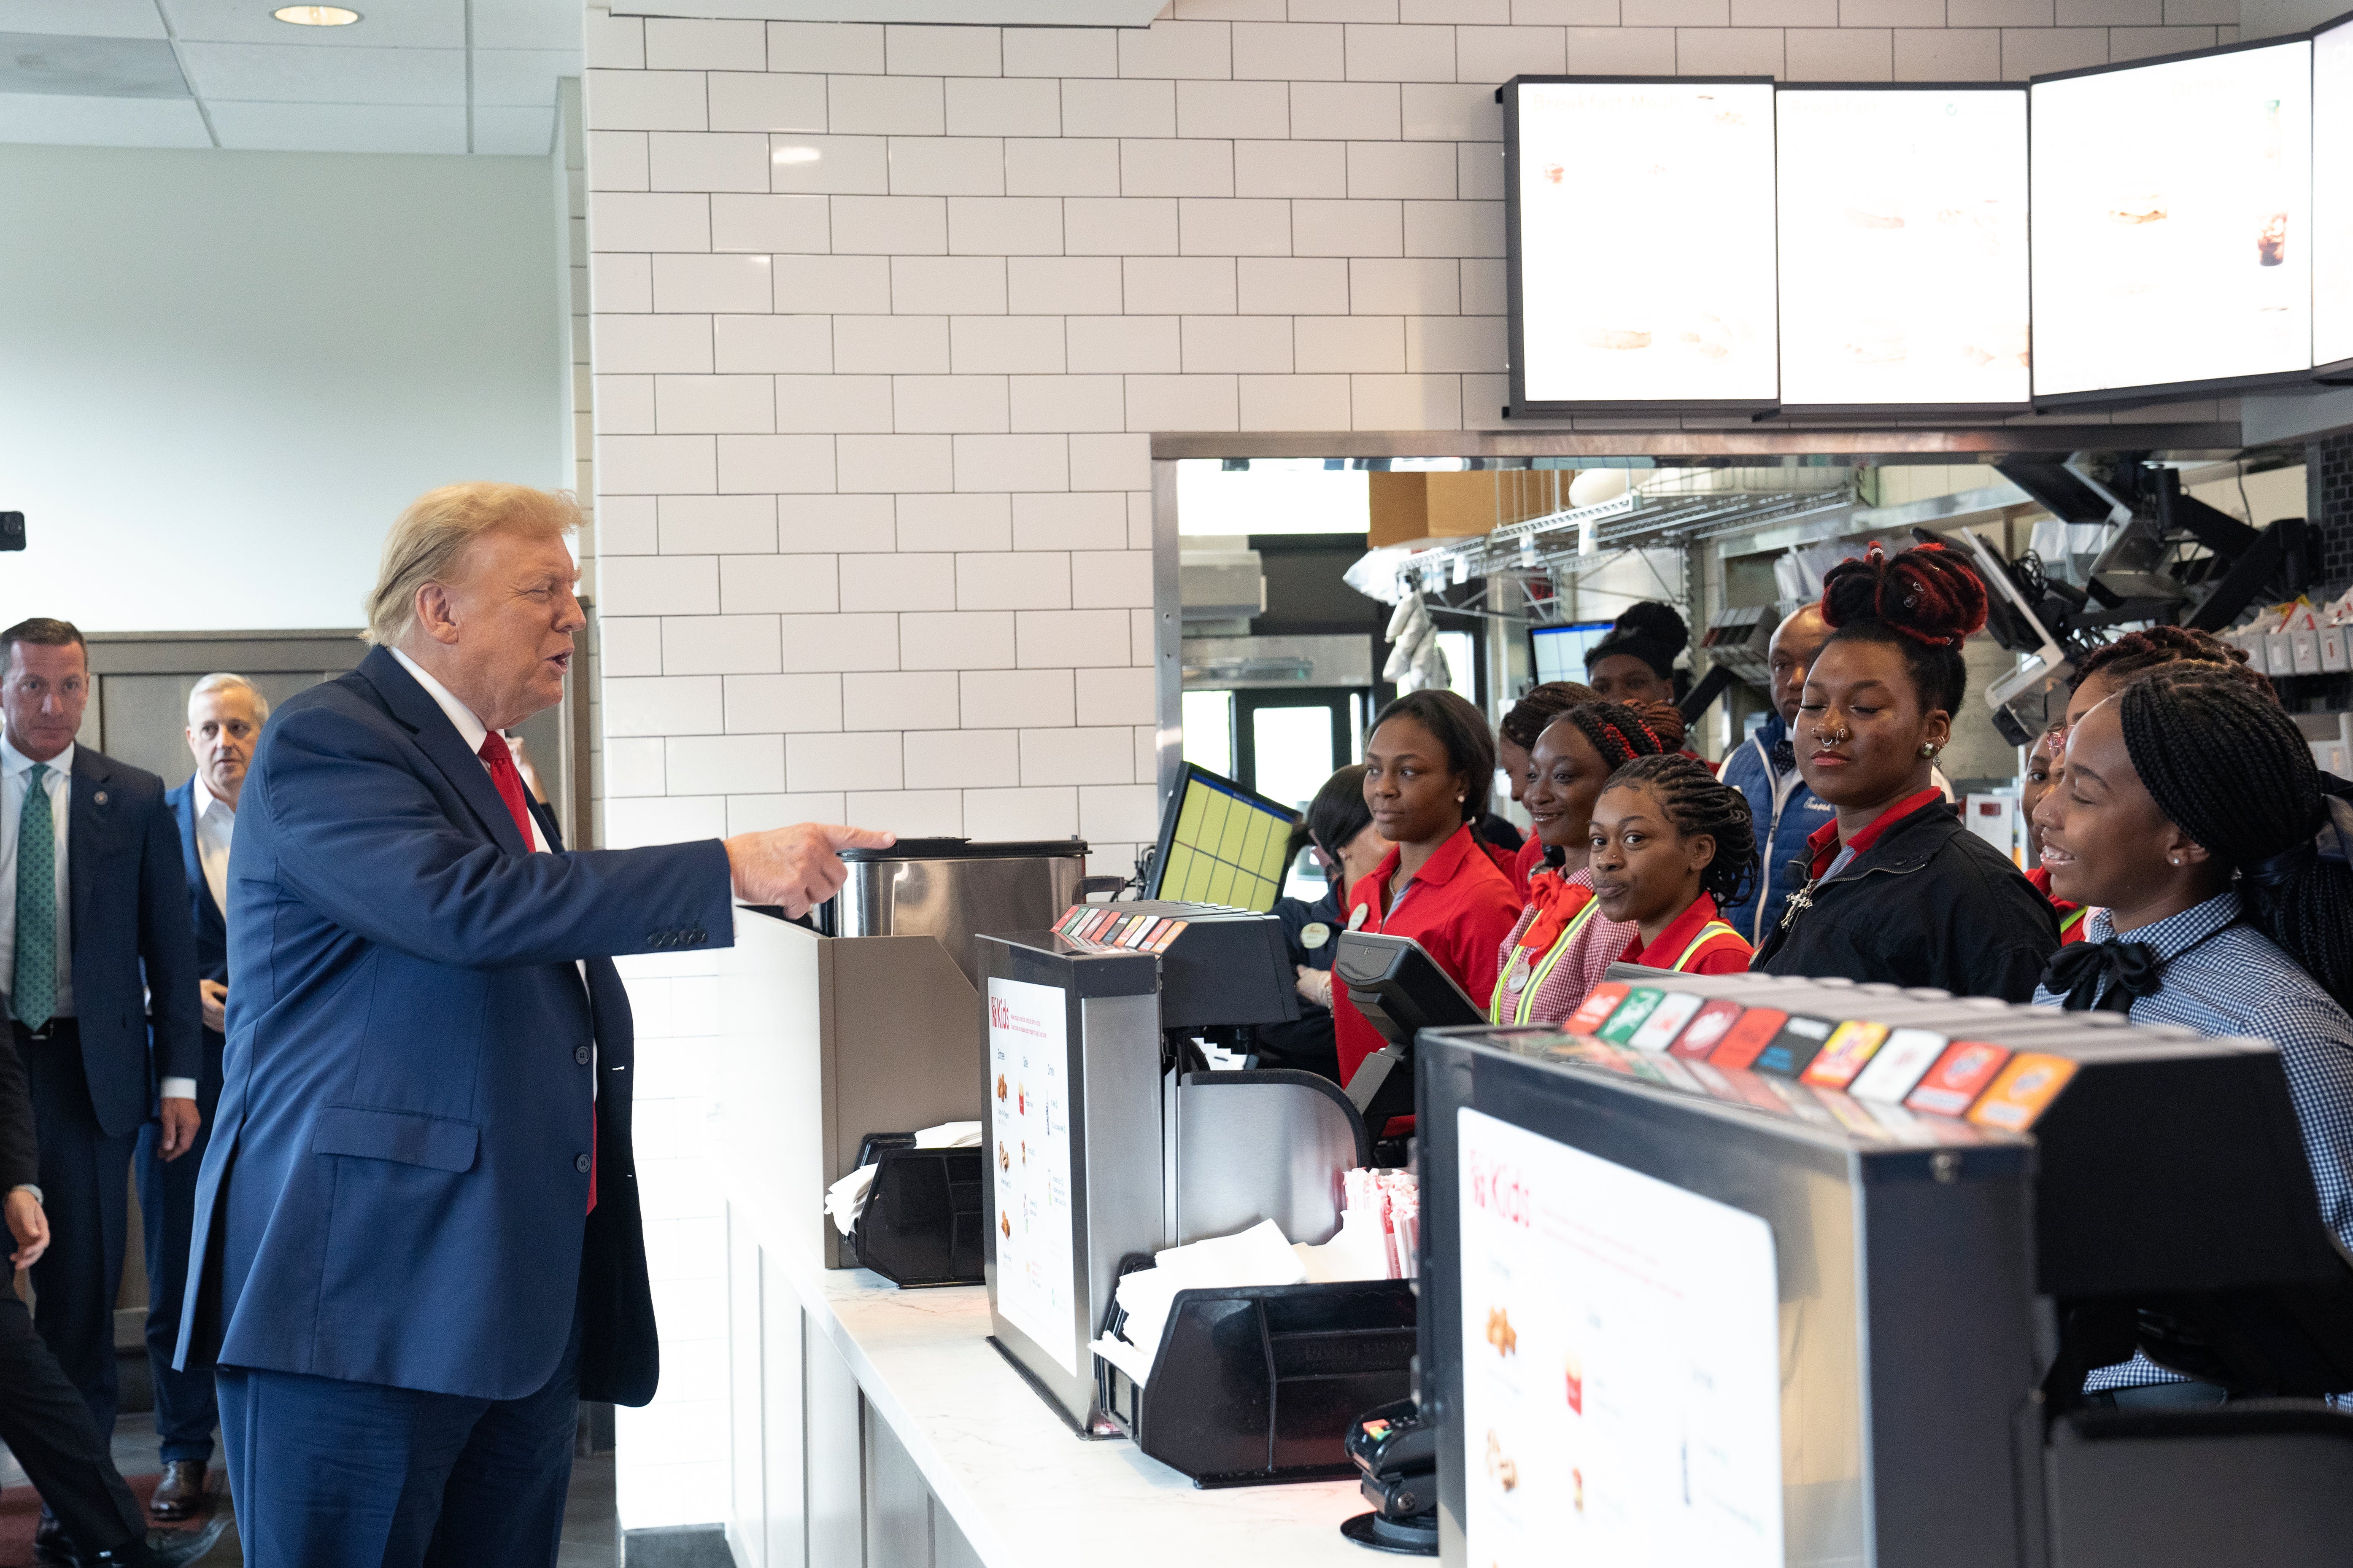 Trump indulges one of his hobbies – handing out fast food - as he hits a Chick-fil-A and buys lunch for fans